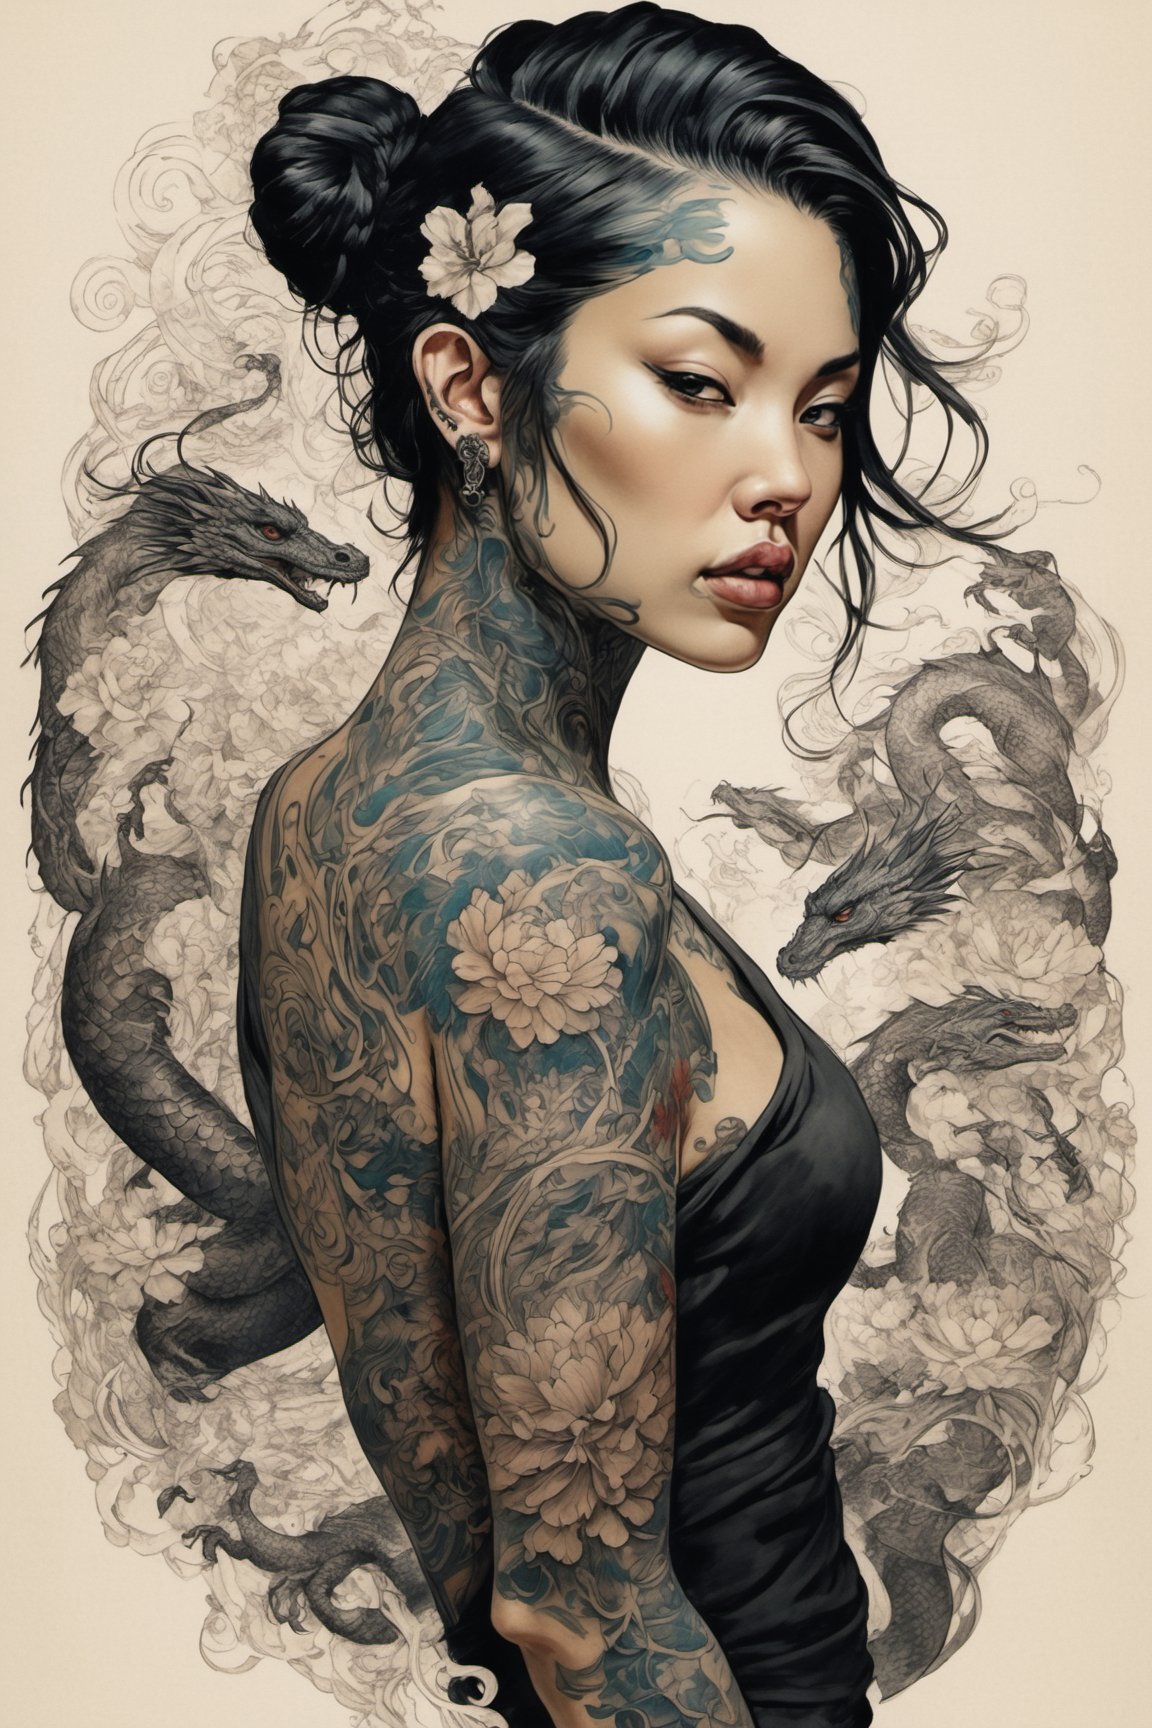 Generate hyper realistic image of a woman with a strong and intricate aesthetic, blending elements of nature, tattoos. She is wearing a black top that reveals her back and shoulders, showcasing her detailed tattoos. The outfit is minimalistic, focusing attention on her tattoos and overall physique. she is adorned with elaborate tattoos, predominantly featuring a dragon design that wraps around her shoulder and arm. The very colourful tattoos are detailed and intricate. Additional tattoos can be seen on her neck and other parts of her body, enhancing her fierce and warrior-like appearance. Her hair is styled in a messy yet elegant updo, with loose strands framing her face. The dark hair adds to her striking look, providing a stark contrast to her tattoos.
In the style of (((Hokusai))), (((Sukenobu))), (((Settei))), (((Shuncho)))
